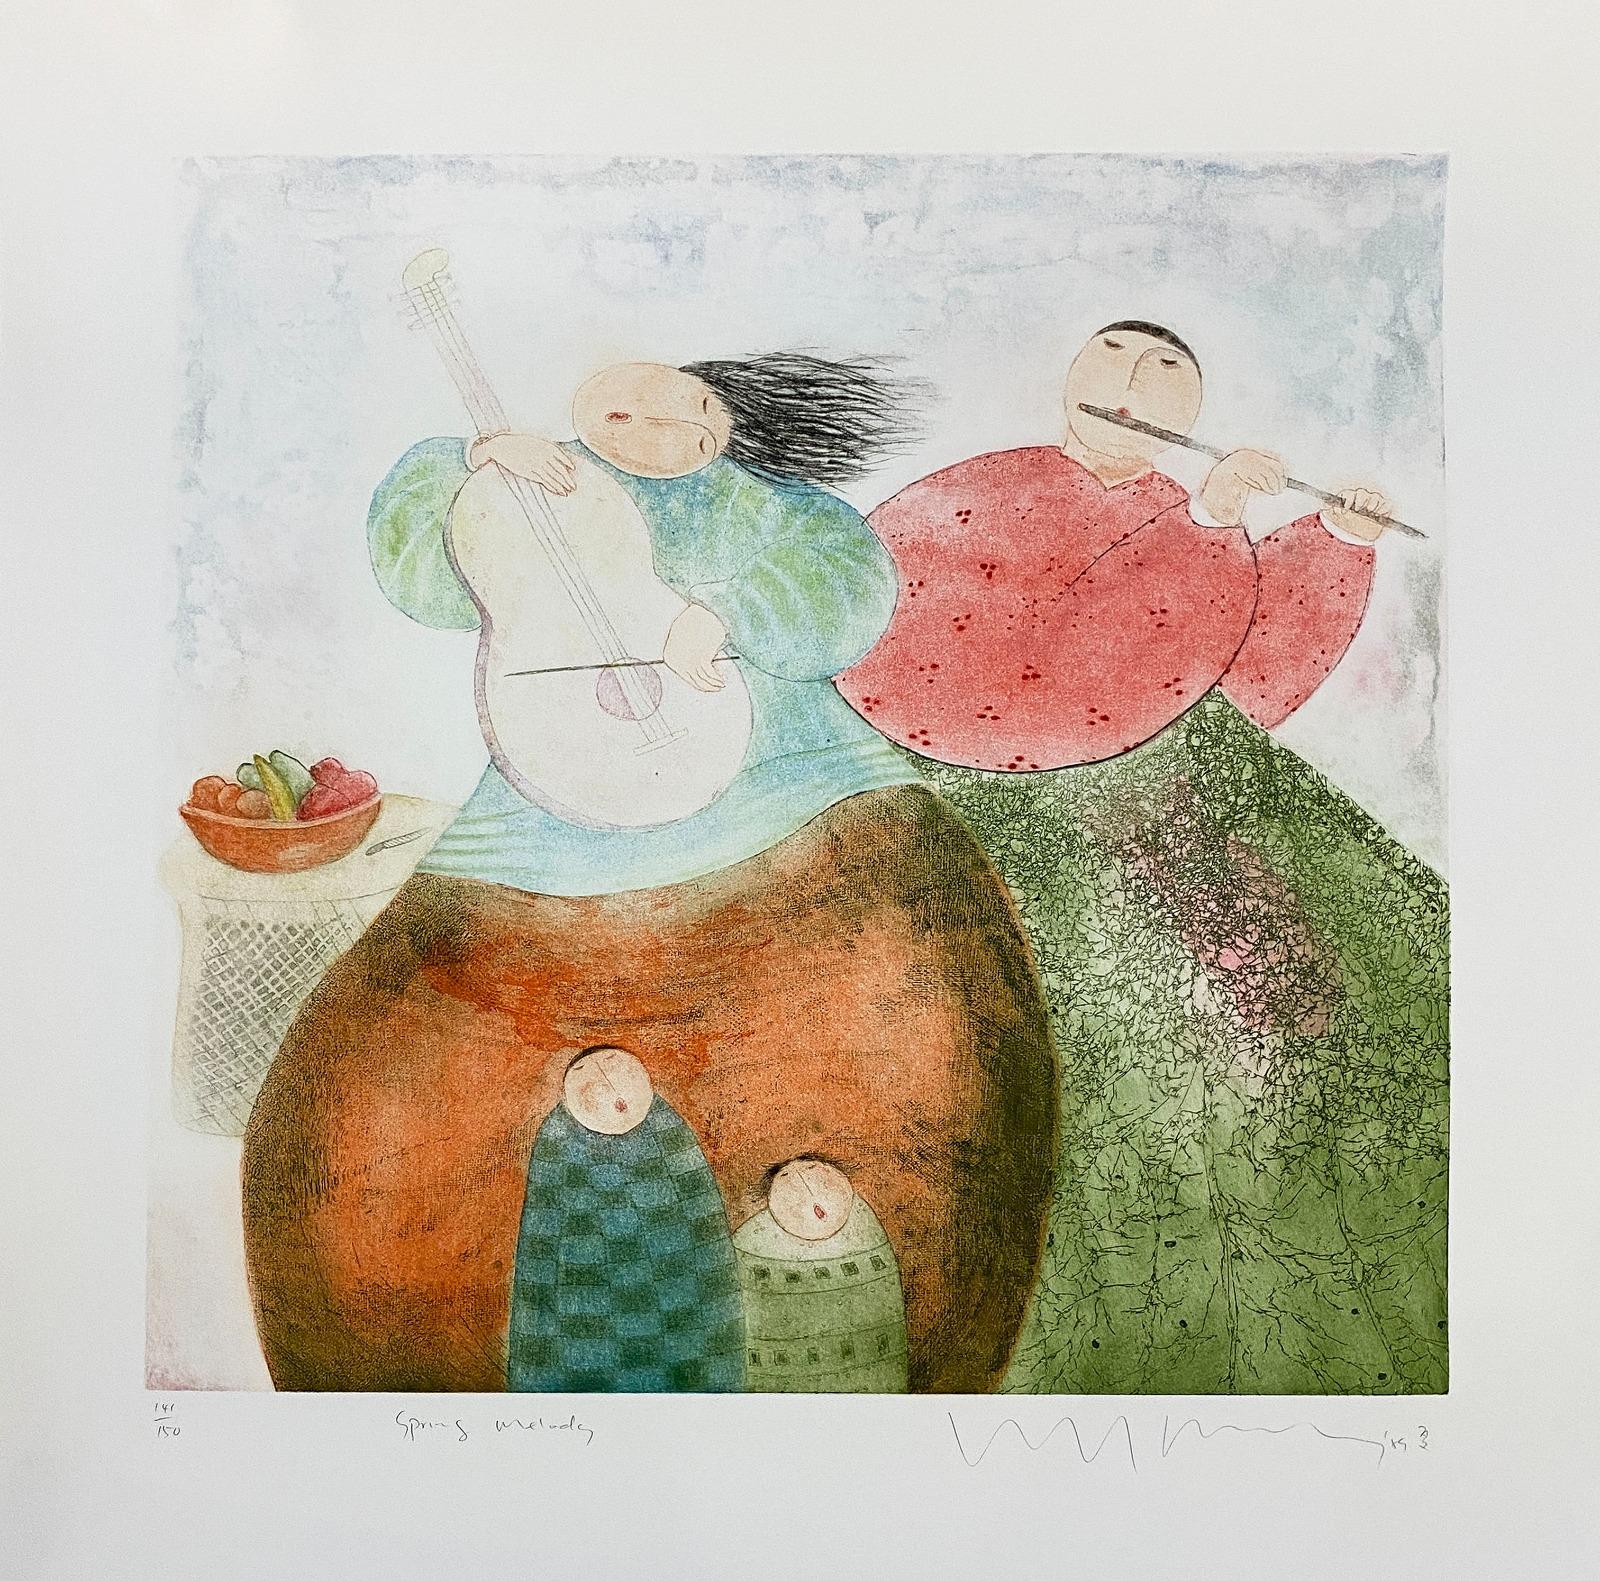 Spring Melody, Malaysian Asian Contemporary, Limited Edition, Drypoint Etching - Painting by Eng Tay